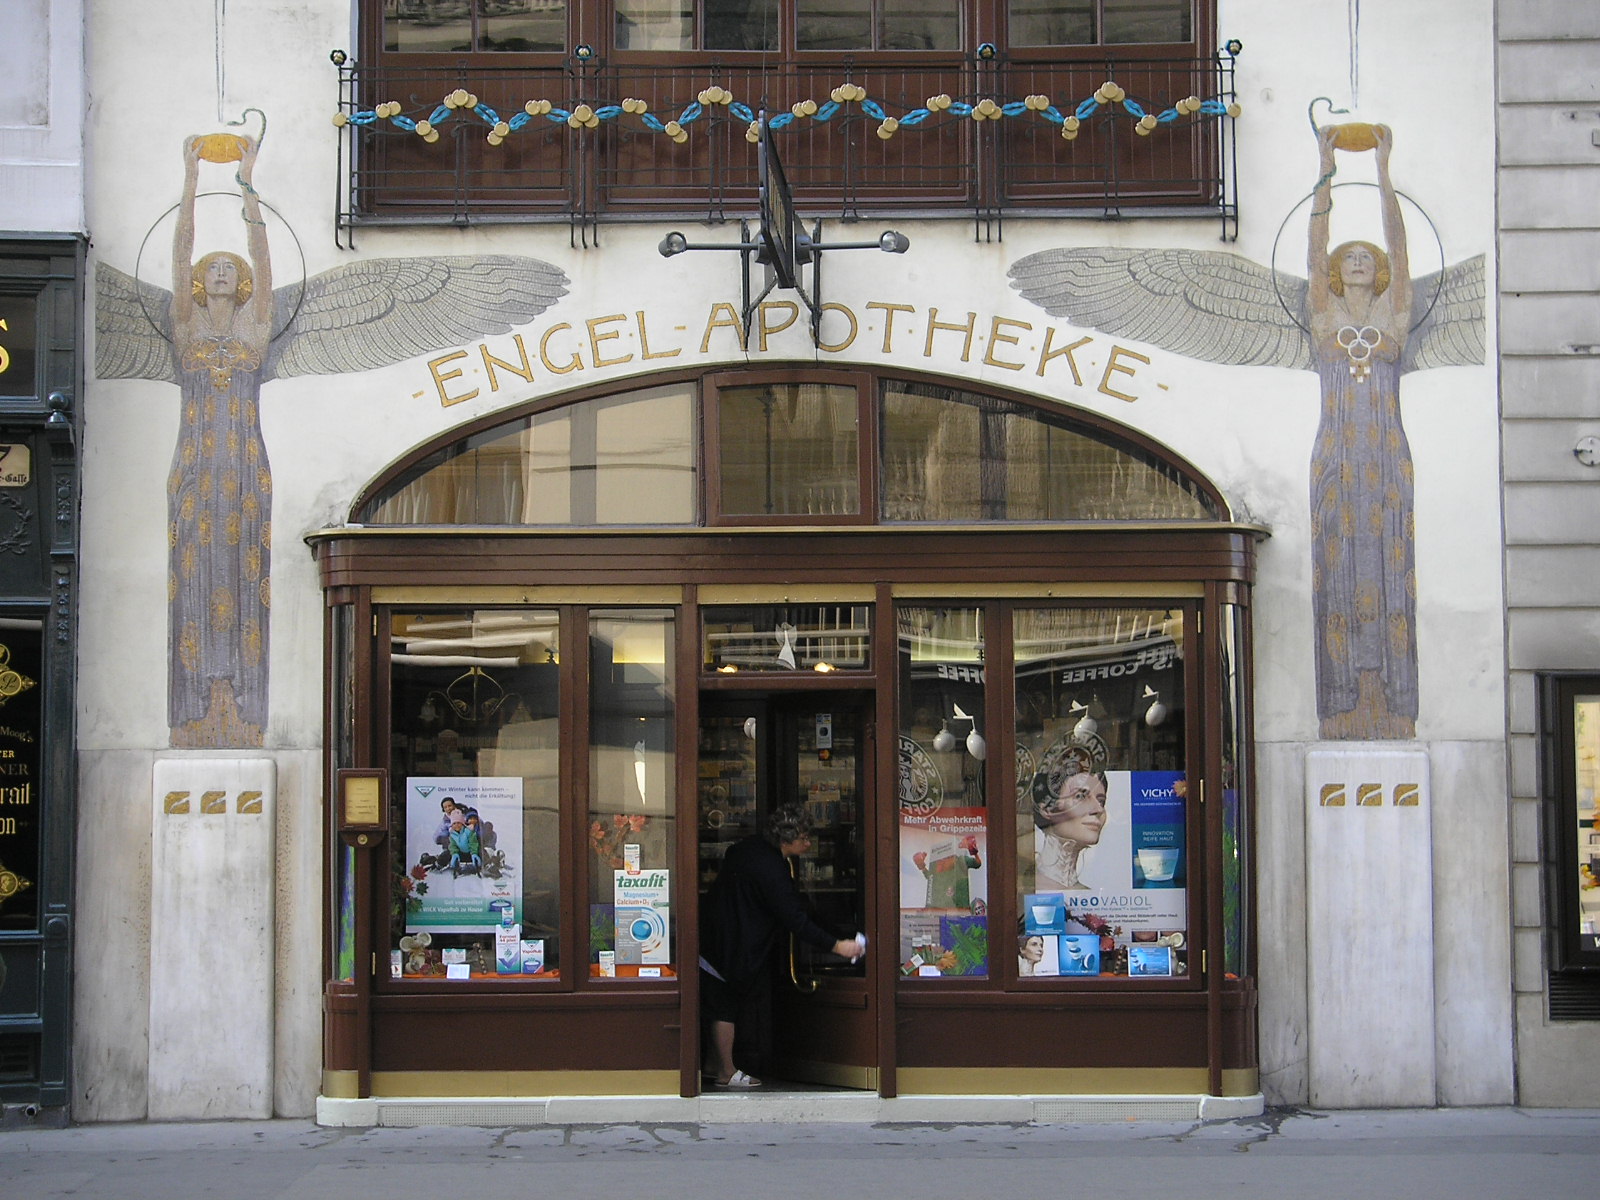 Storefront for Engel Apotheke that depicts an angel on either side of the door